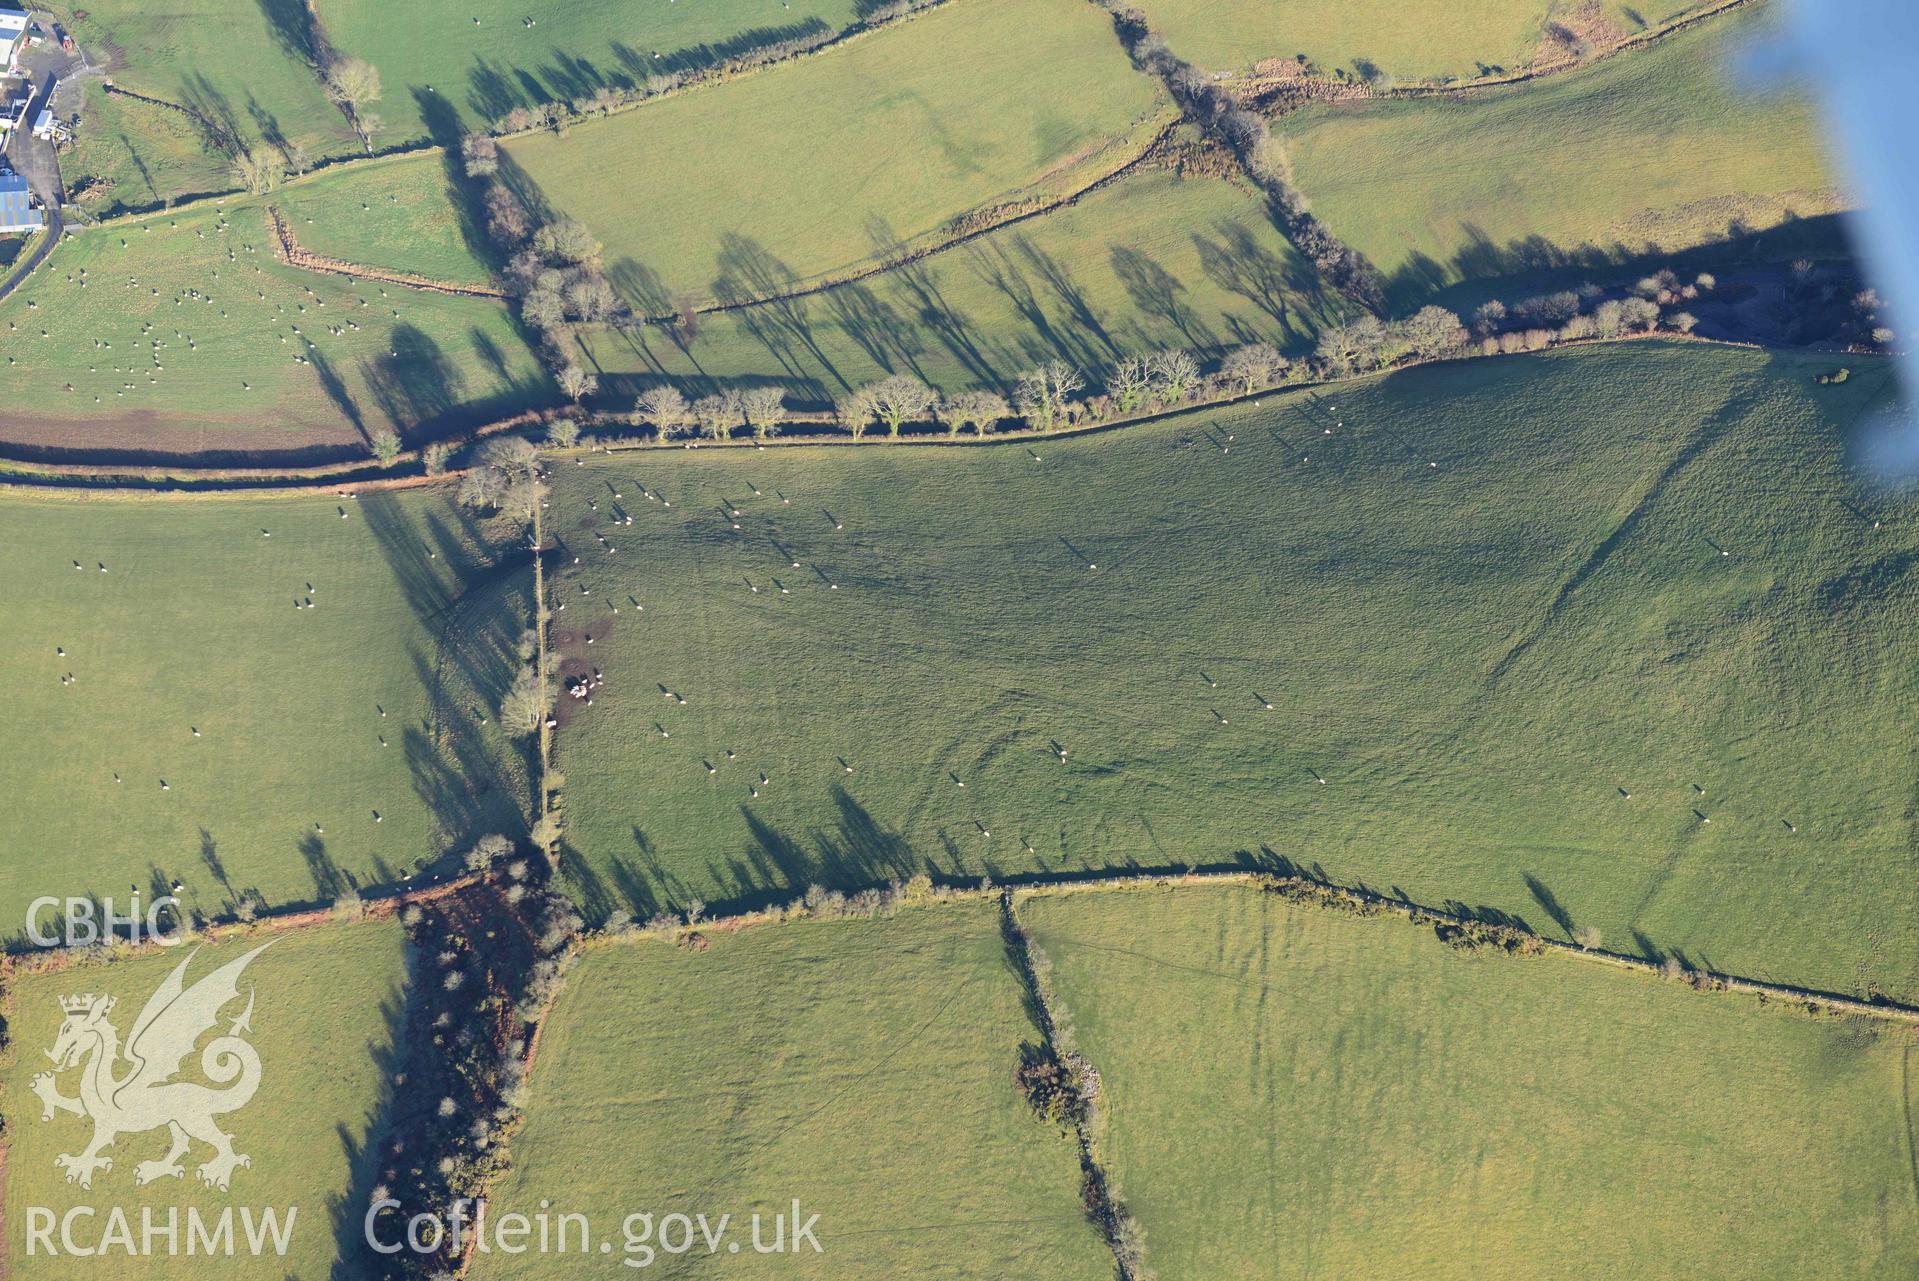 Oblique aerial photograph showing detail of prehistoric earthworks at SN525591, Castell Perthi Mawr. Taken during the Royal Commission’s programme of archaeological aerial reconnaissance by Toby Driver on 17th January 2022